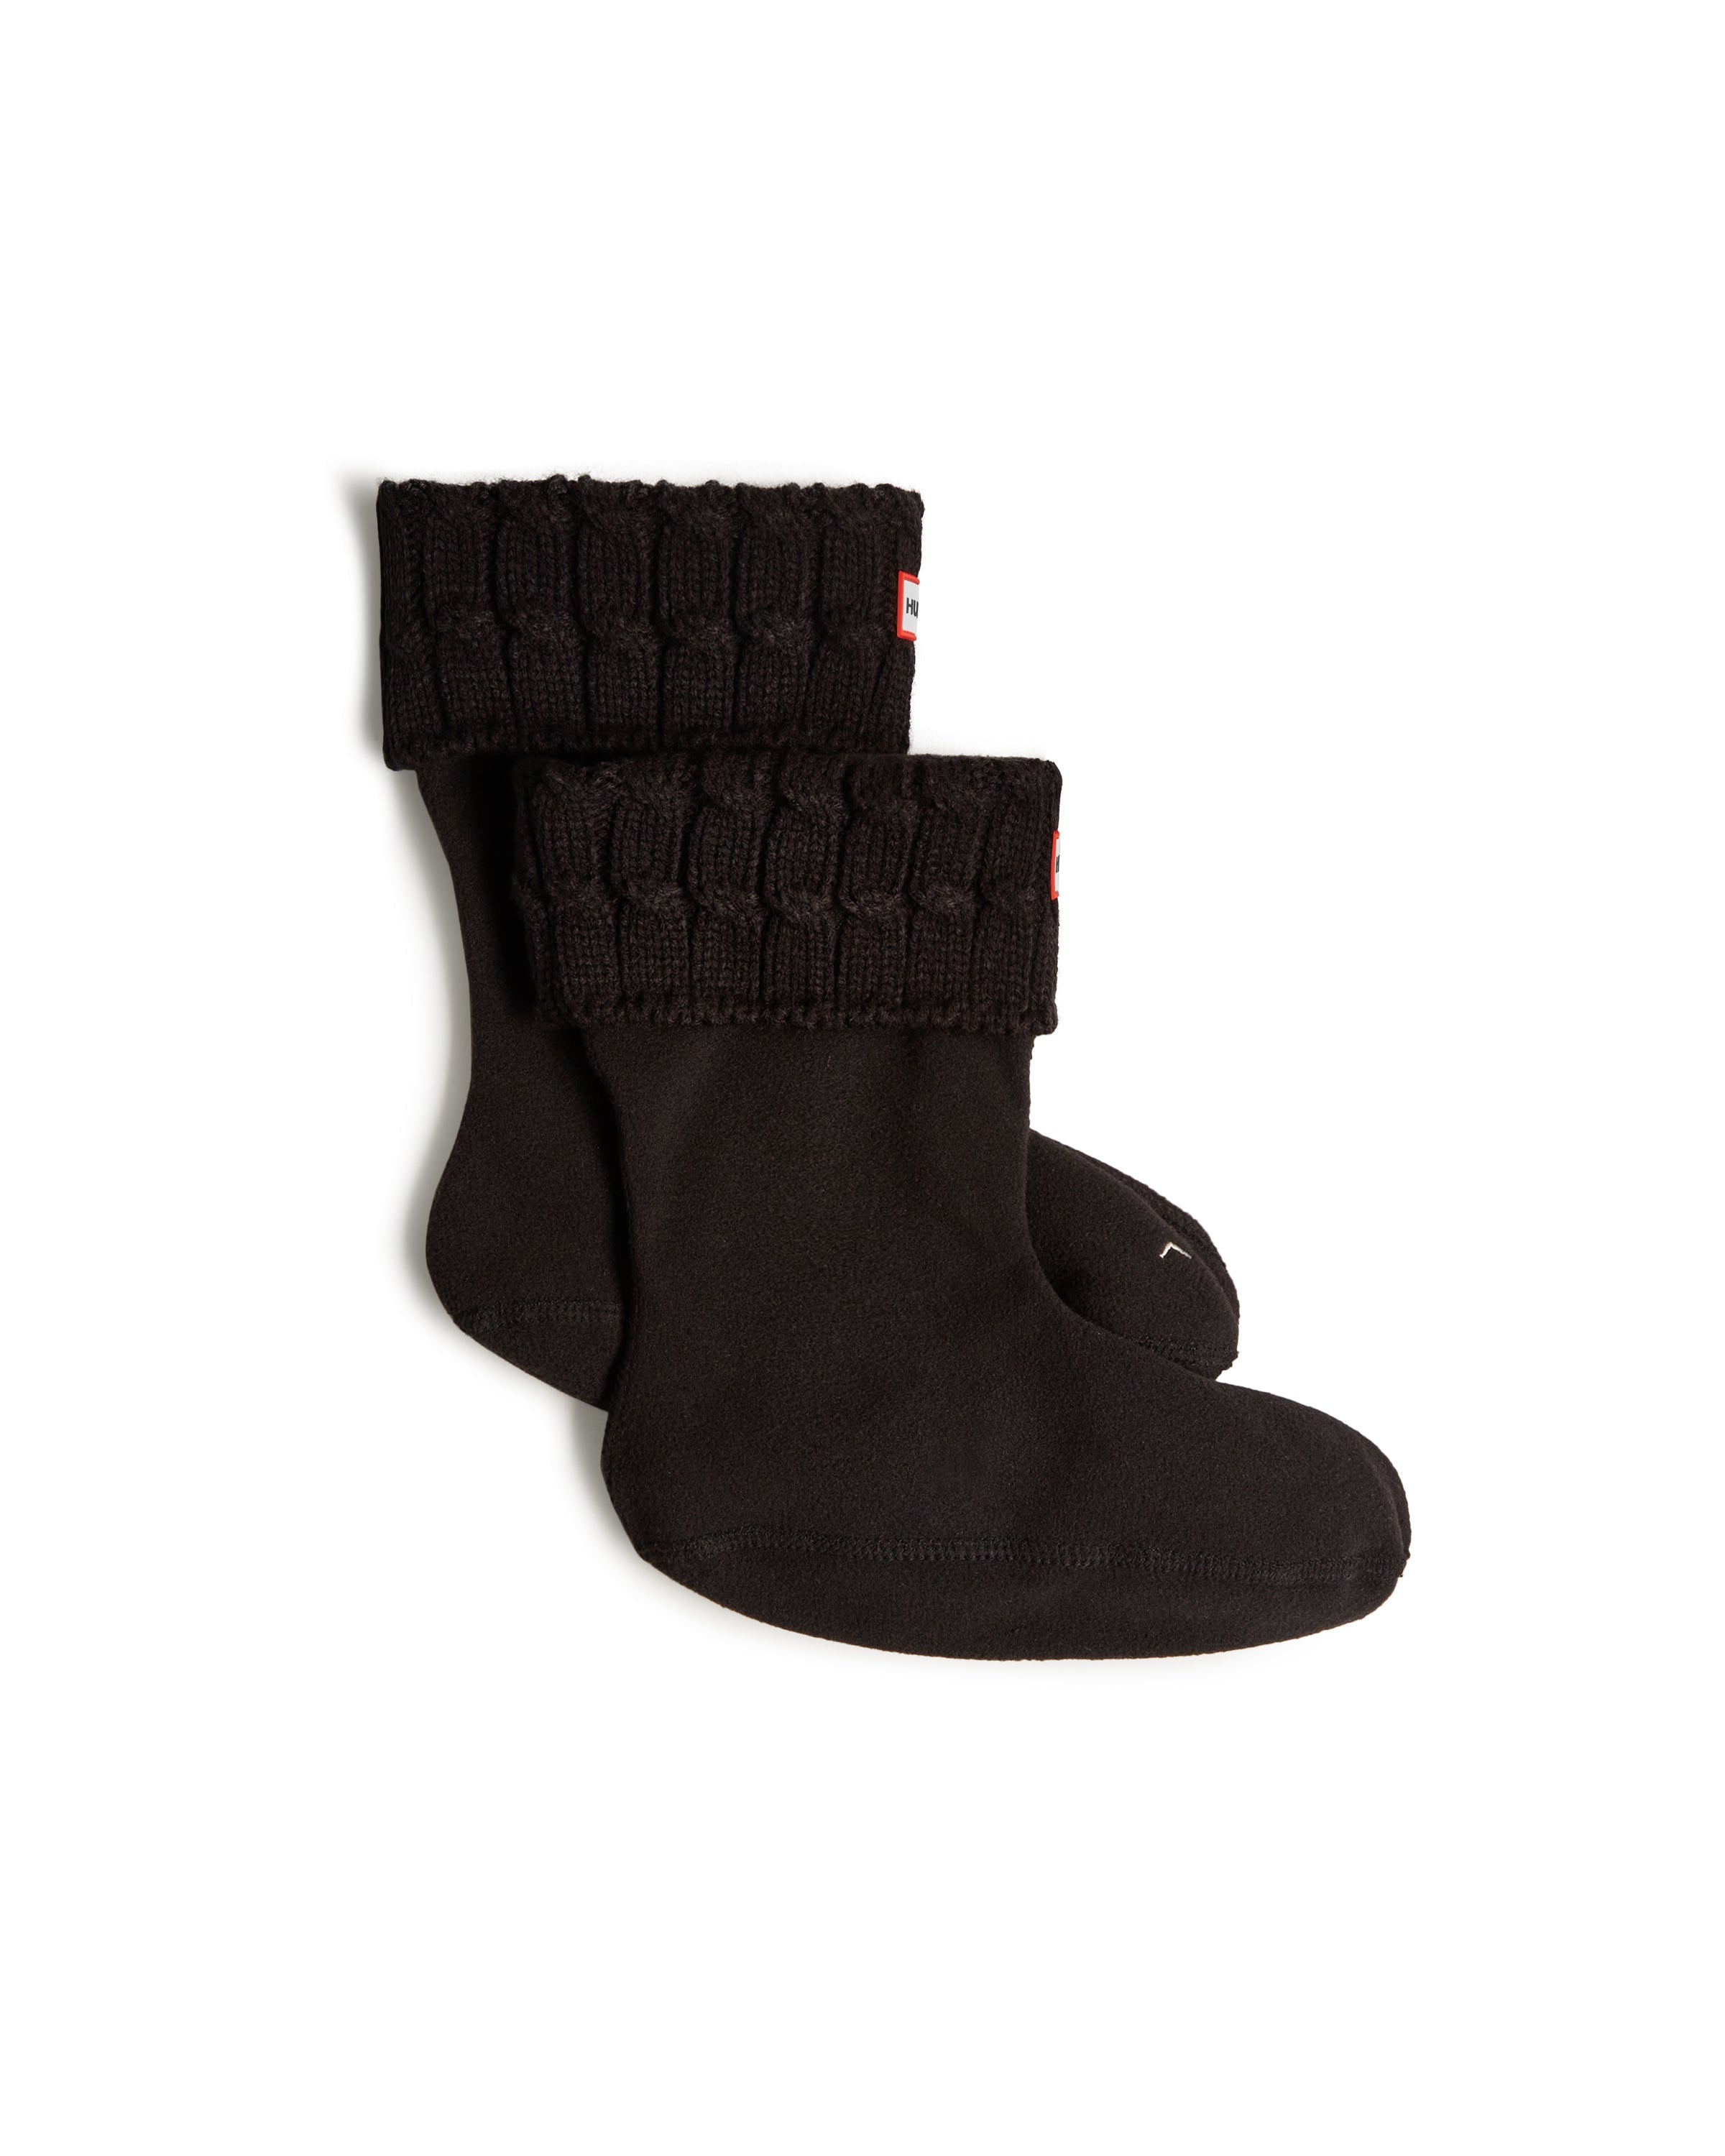 Recycled 6-Stitch Cable Cuff Short Boot Socks - Black